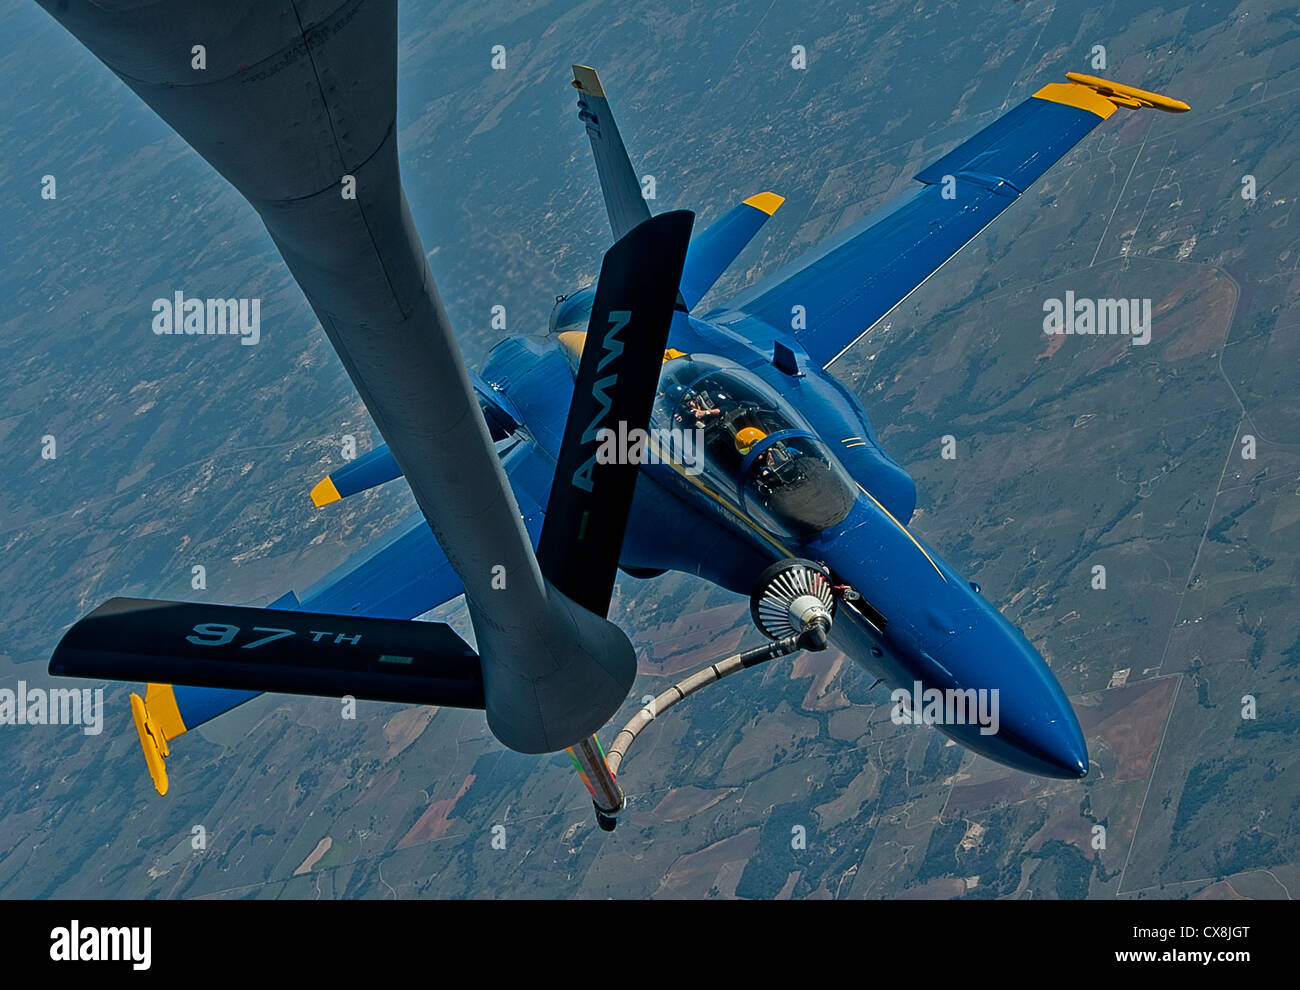 A KC-135 Stratotanker from Altus AFB refuels an Navy Blue Angel FA-18 Hornet from Naval Air Station Pensacola, Fla., Sept. 20, 2012. The Blue Angels were refueled on the way to Grand Juction, Colo., to perform in the First Mountain West Airshow. Stock Photo